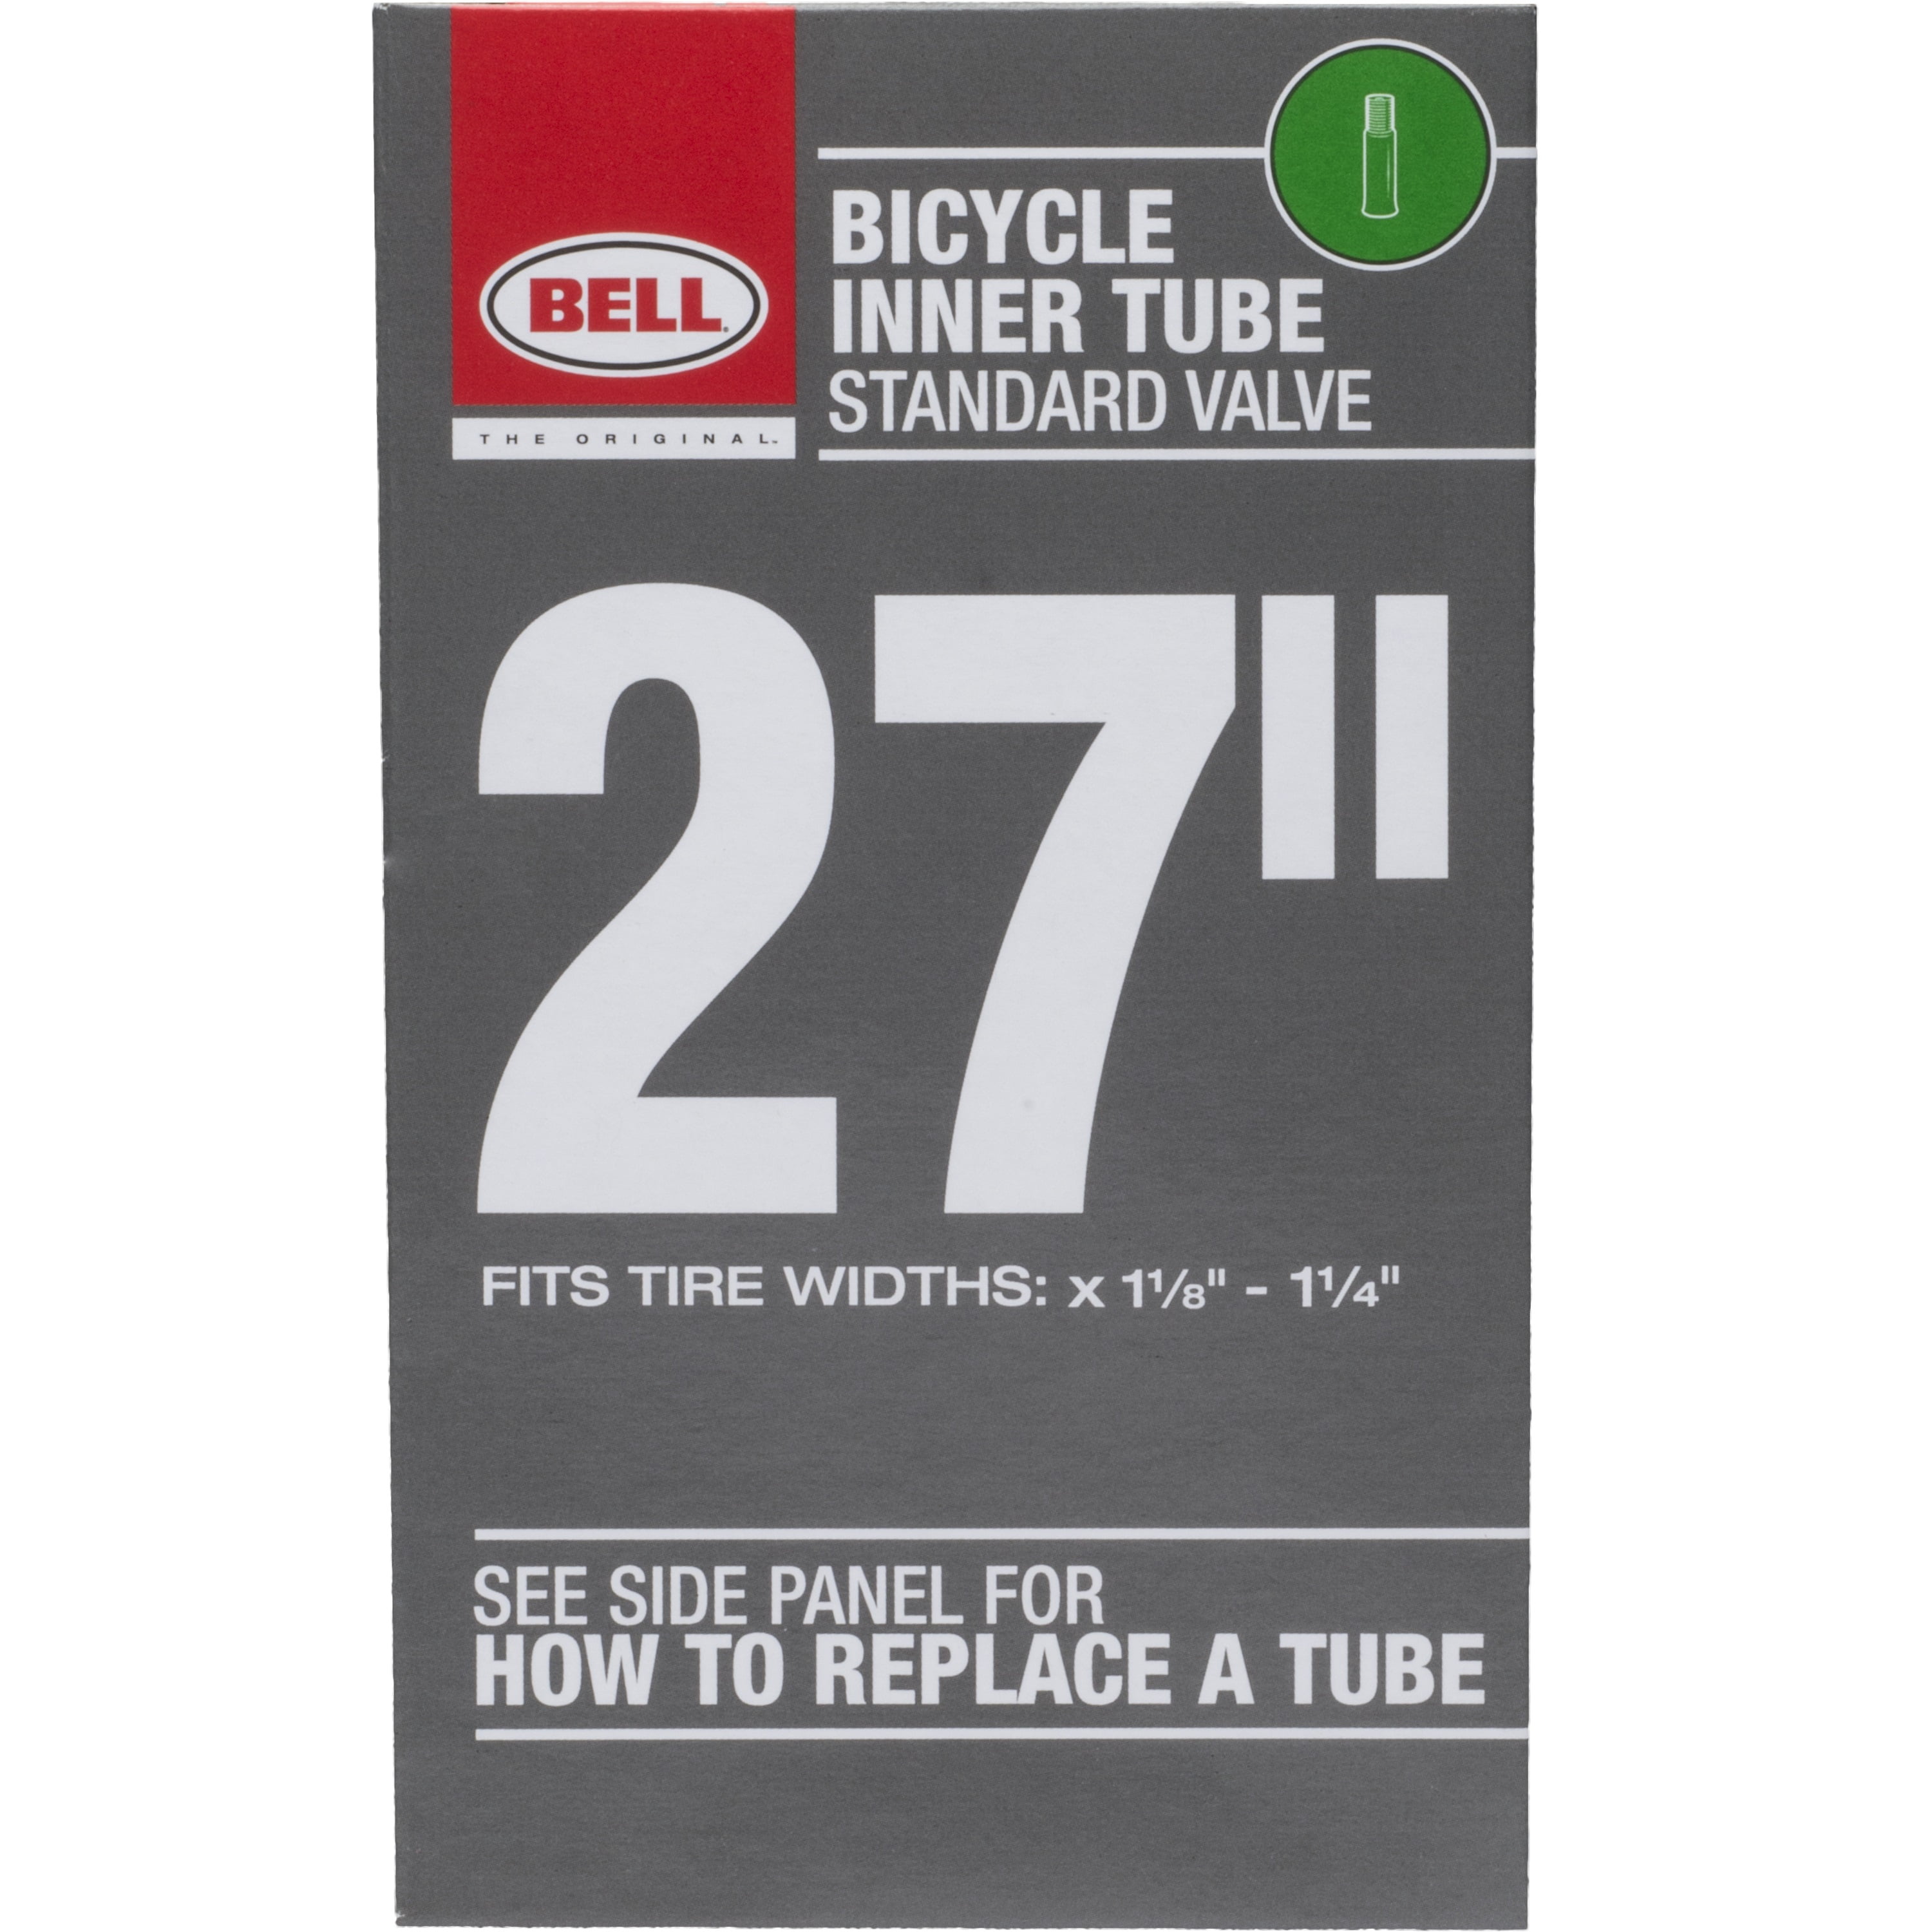 3 x INNER TUBES SIZE 12 1/2 x 2 1/4 for Out n About Posted Free 1st Class 